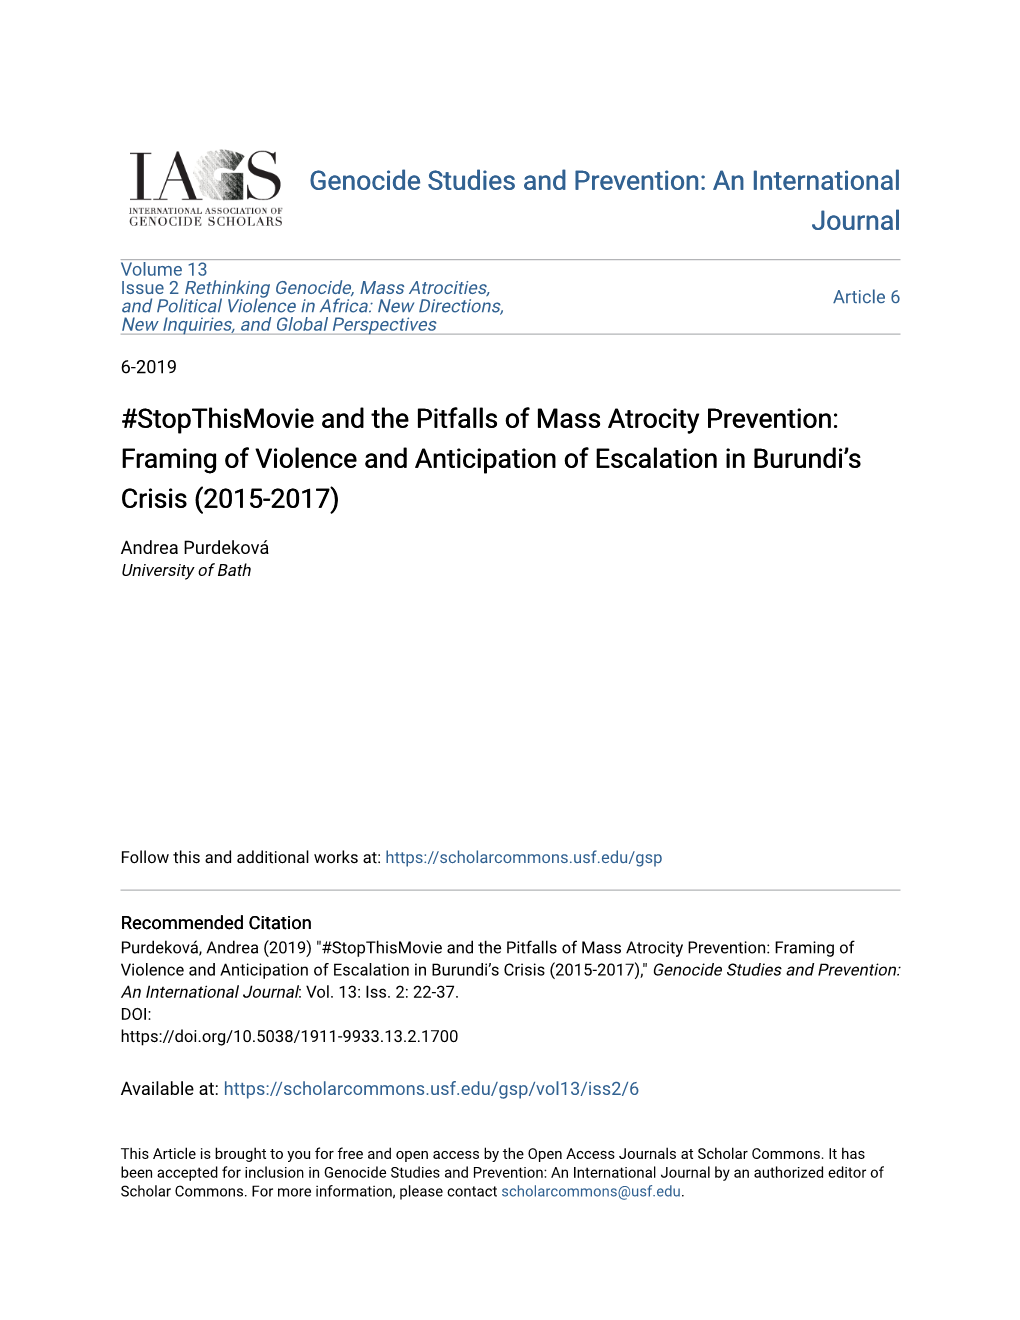 Stopthismovie and the Pitfalls of Mass Atrocity Prevention: Framing of Violence and Anticipation of Escalation in Burundi’S Crisis (2015-2017)